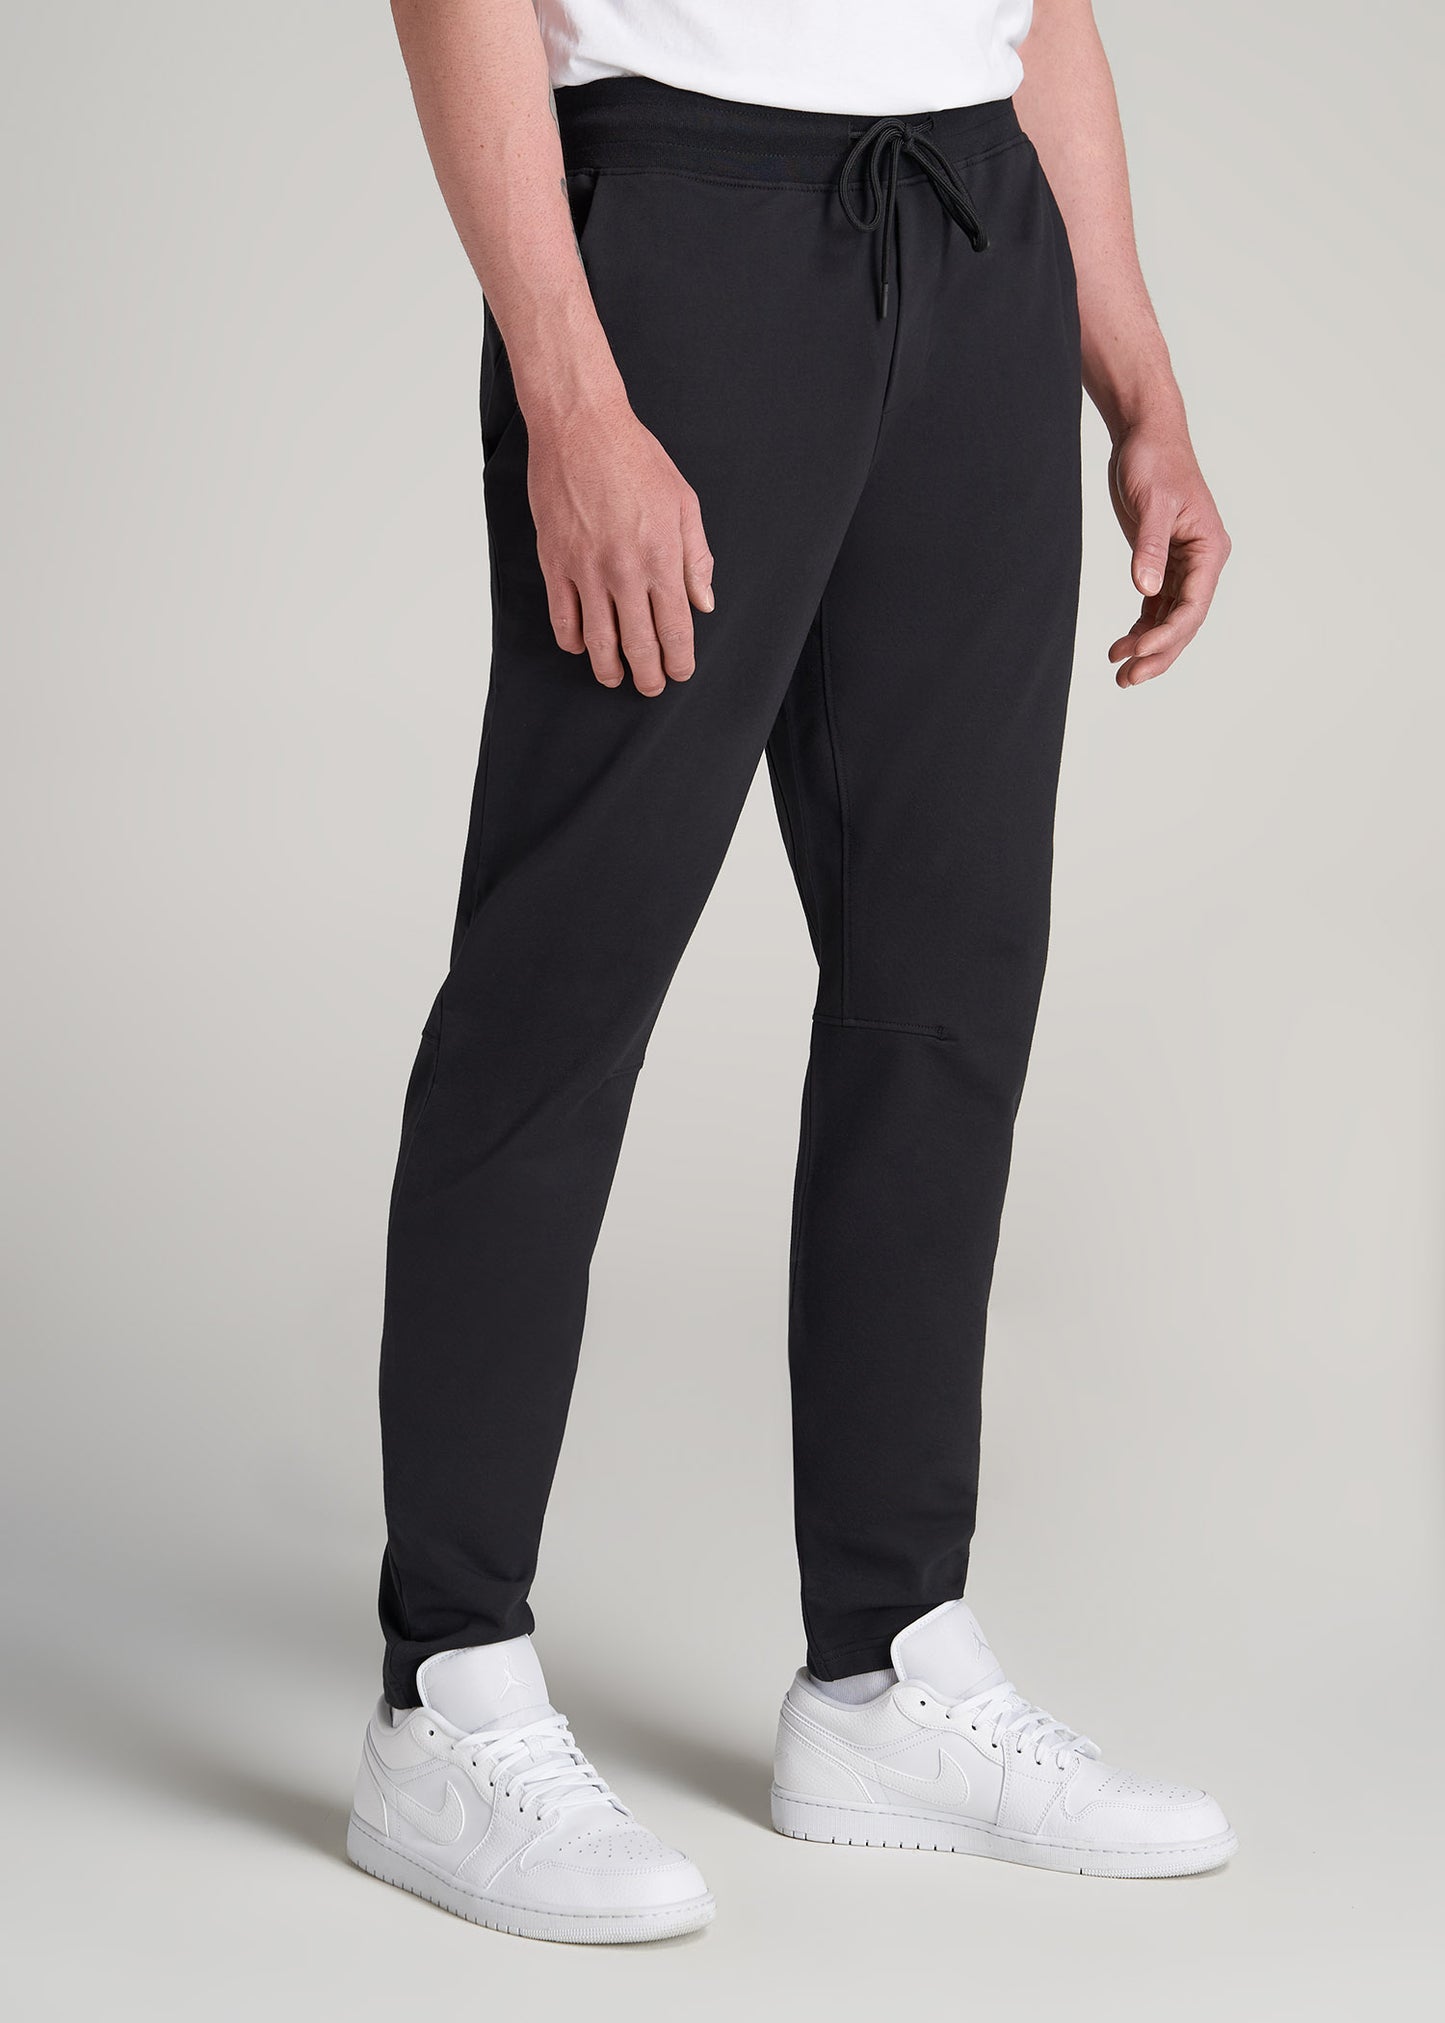    American-Tall-Men-Performance-Tapered-French-Terry-Sweatpants-Black-side